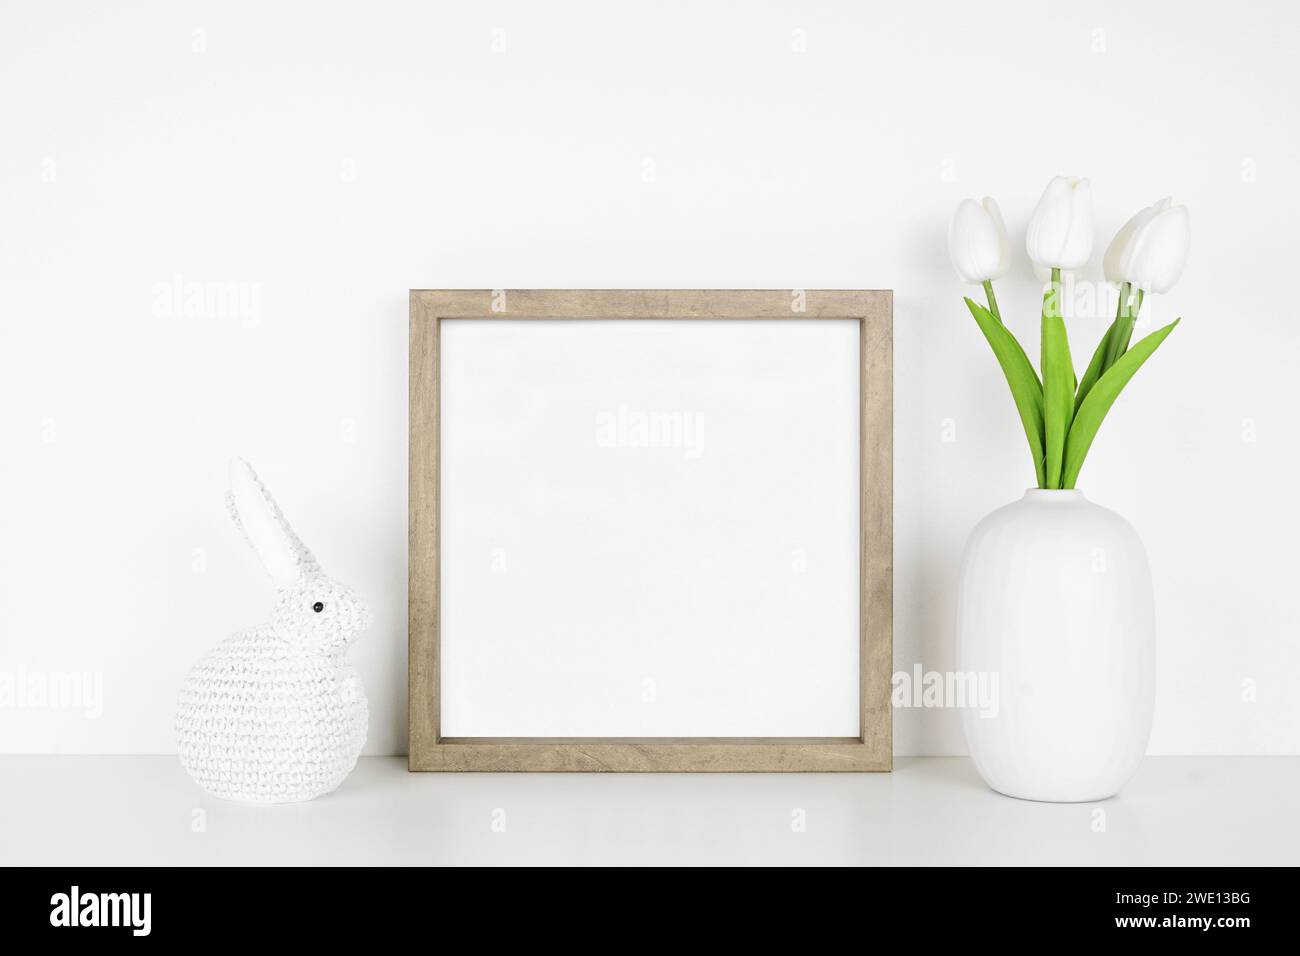 Mock up wood frame with Easter decor on a white shelf. Knit bunny and tulip flowers. Square frame against a white wall. Copy space. Stock Photo